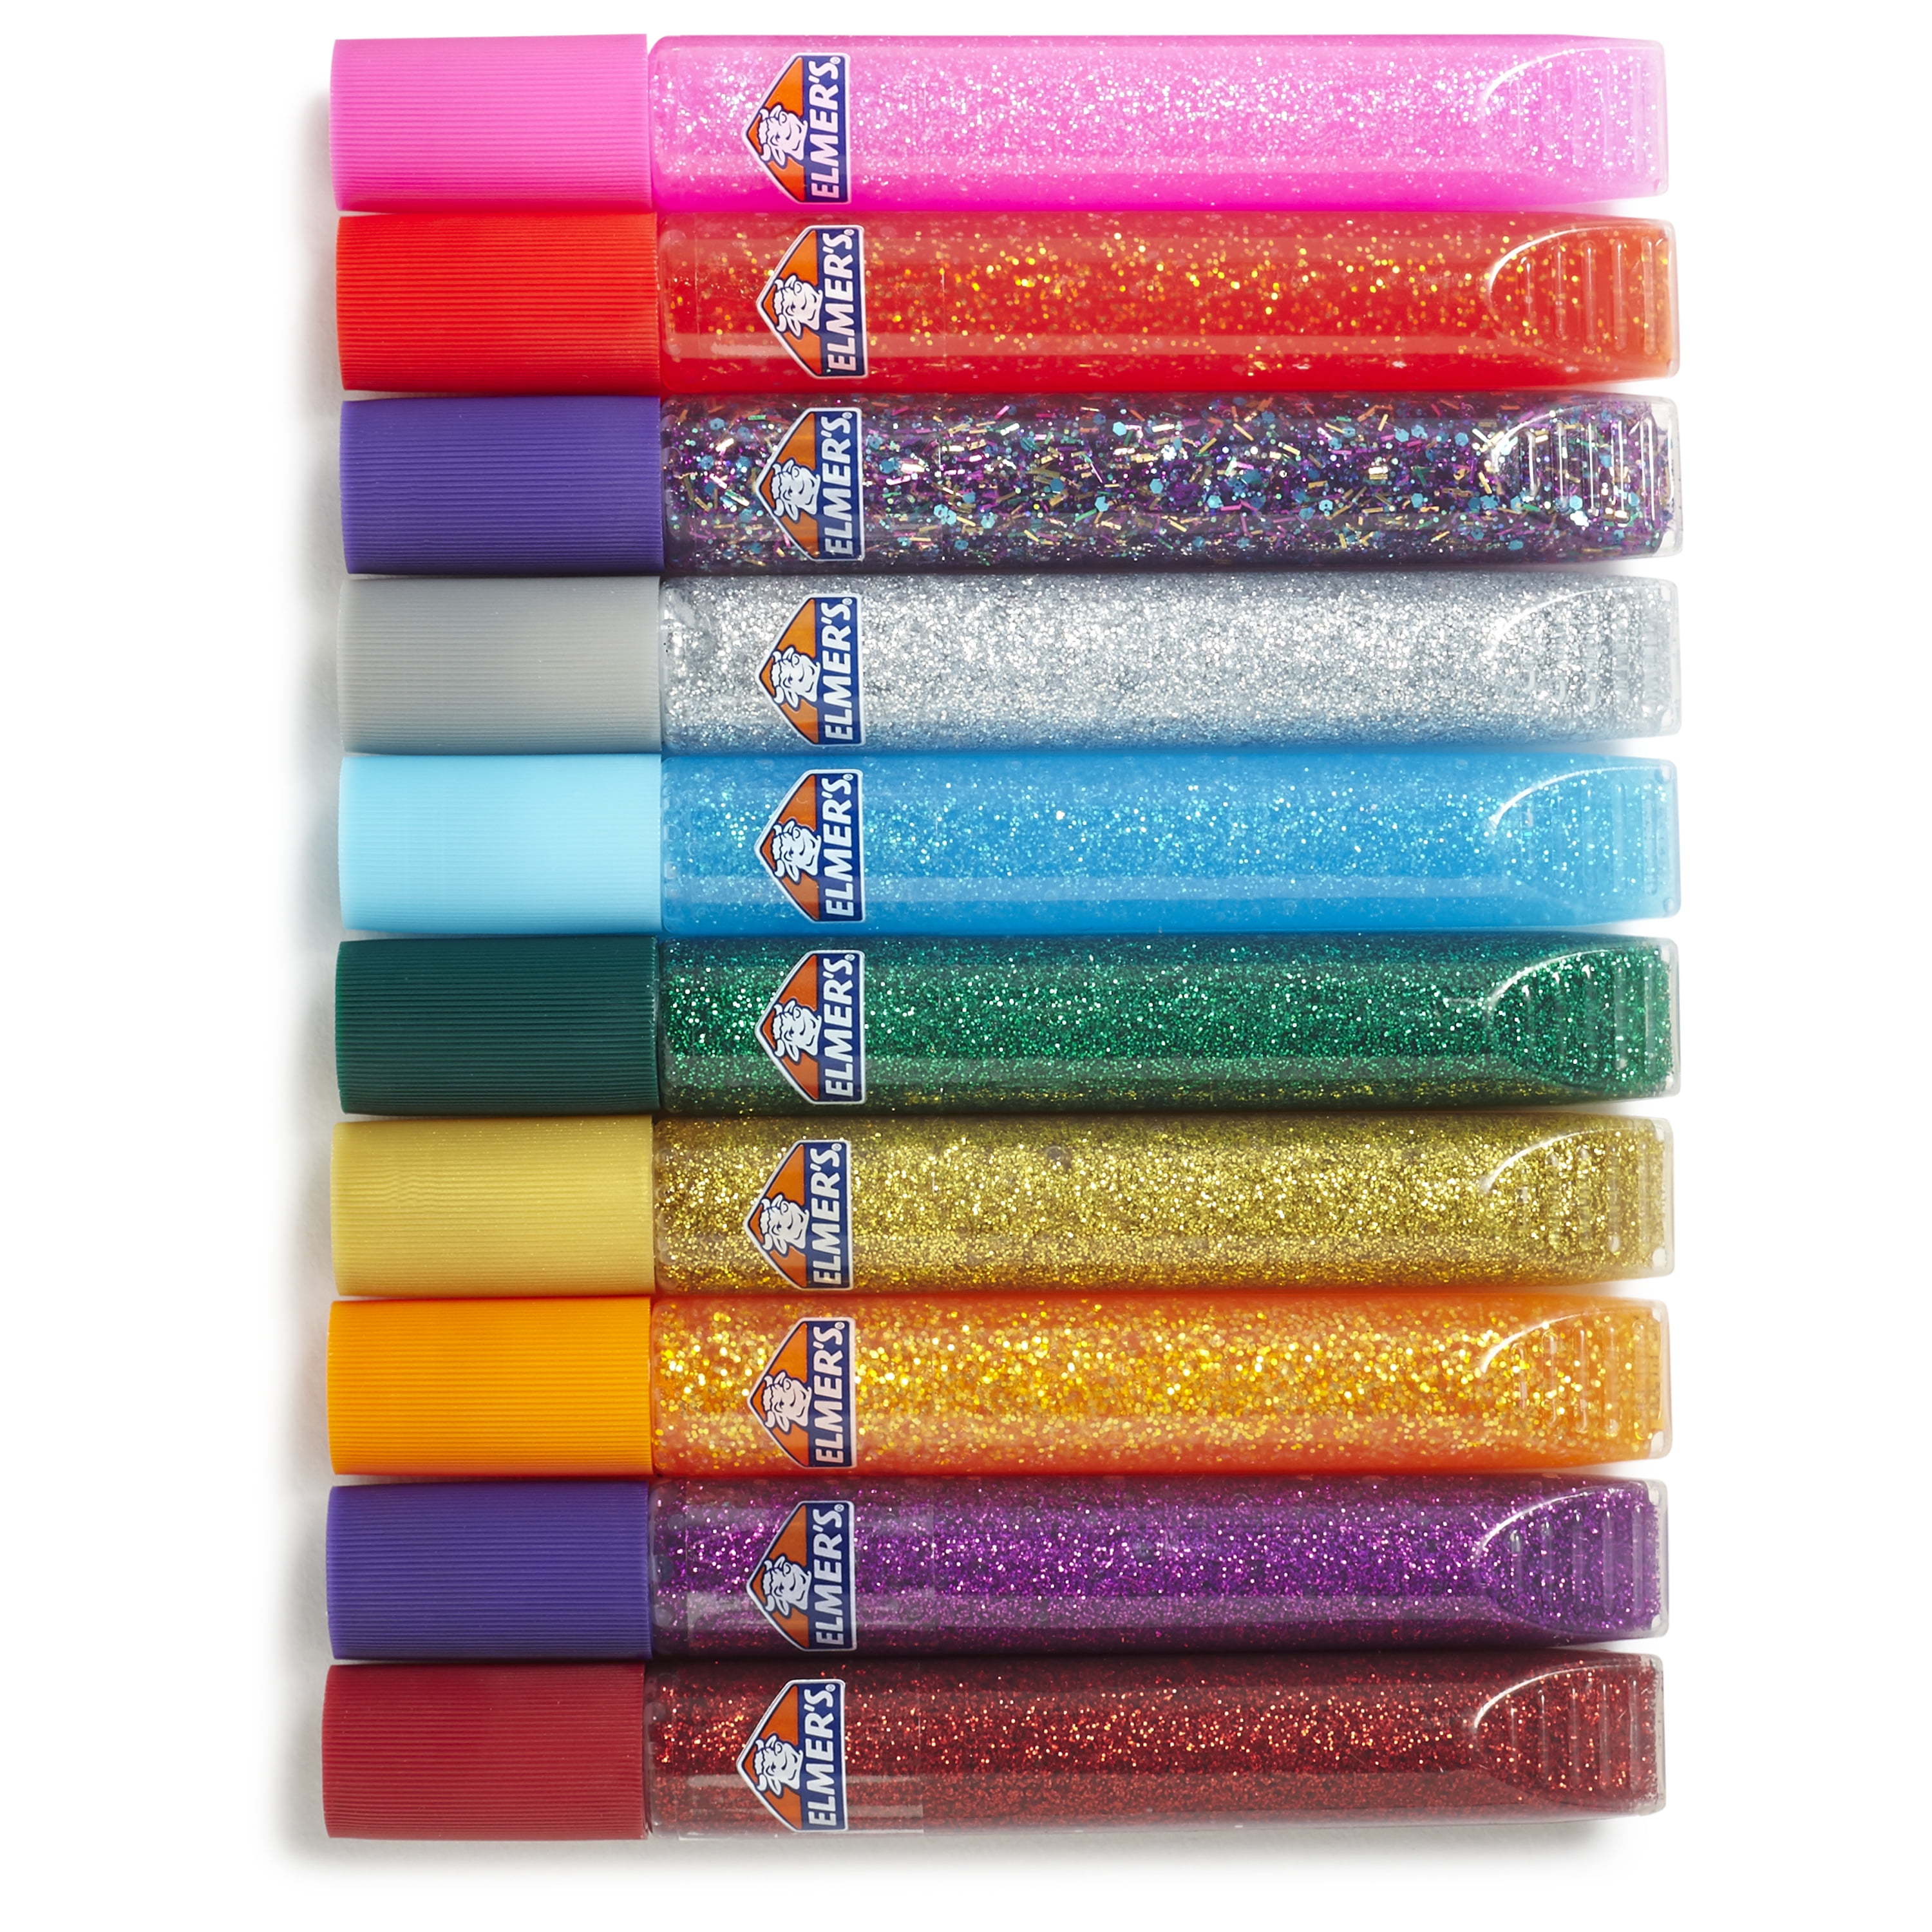 Glitter Glue PenWashable Simmer Glowing Non-Toxic - 0.35 fl oz (10.5 ml)3-Pack - G8 Central